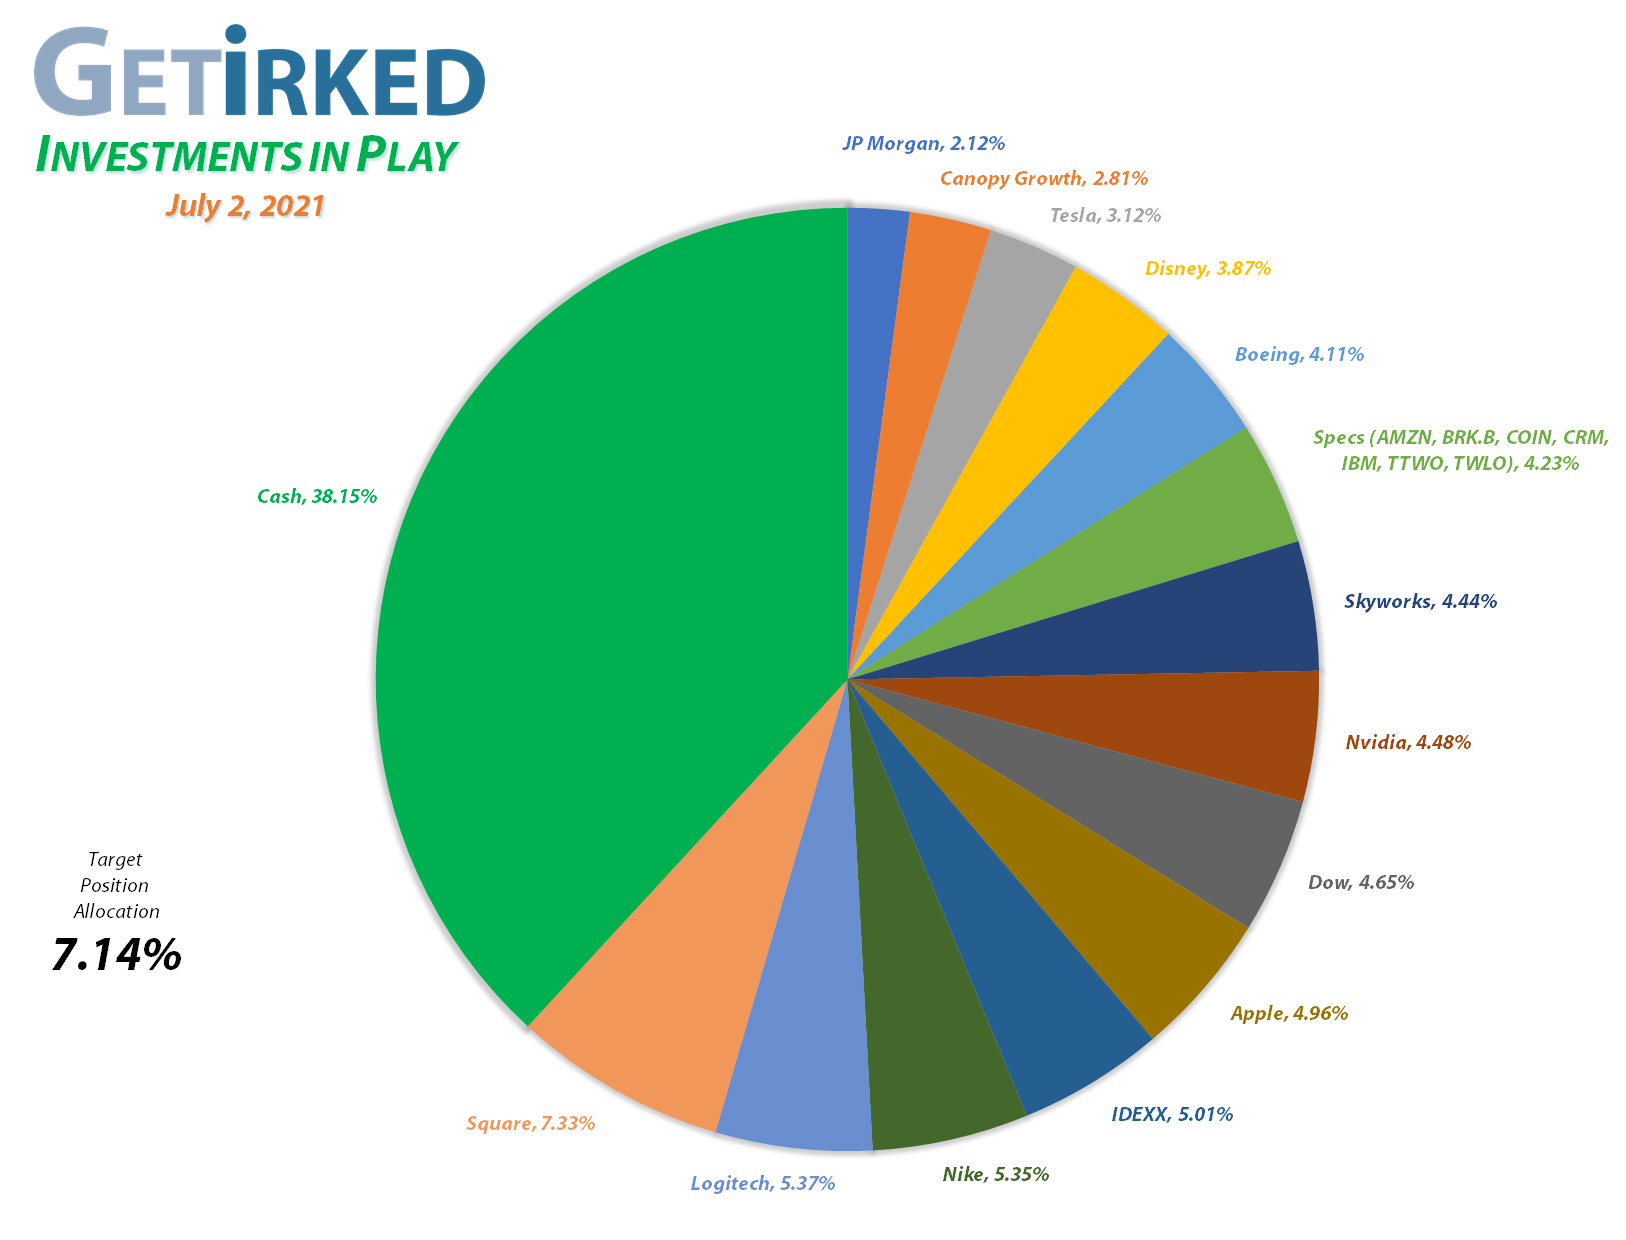 Get Irked - Investments in Play - Current Holdings - March 12, 2021et Irked's Pandemic Portfolio Holdings as of July 2, 2021